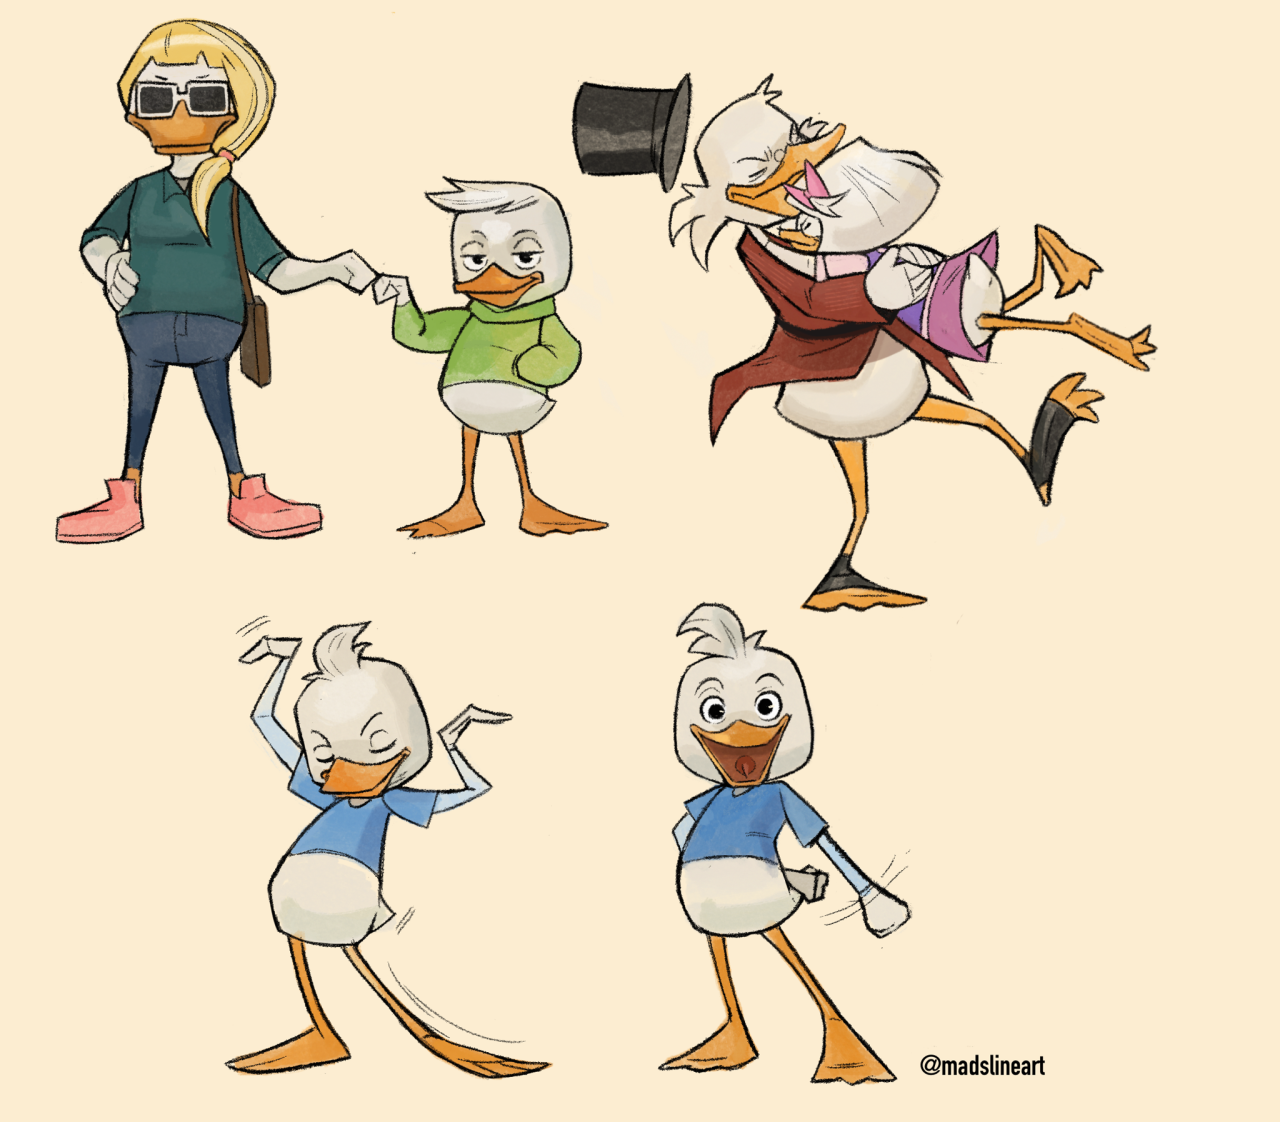 frog - Started Ducktales a few weeks ago and promptly...